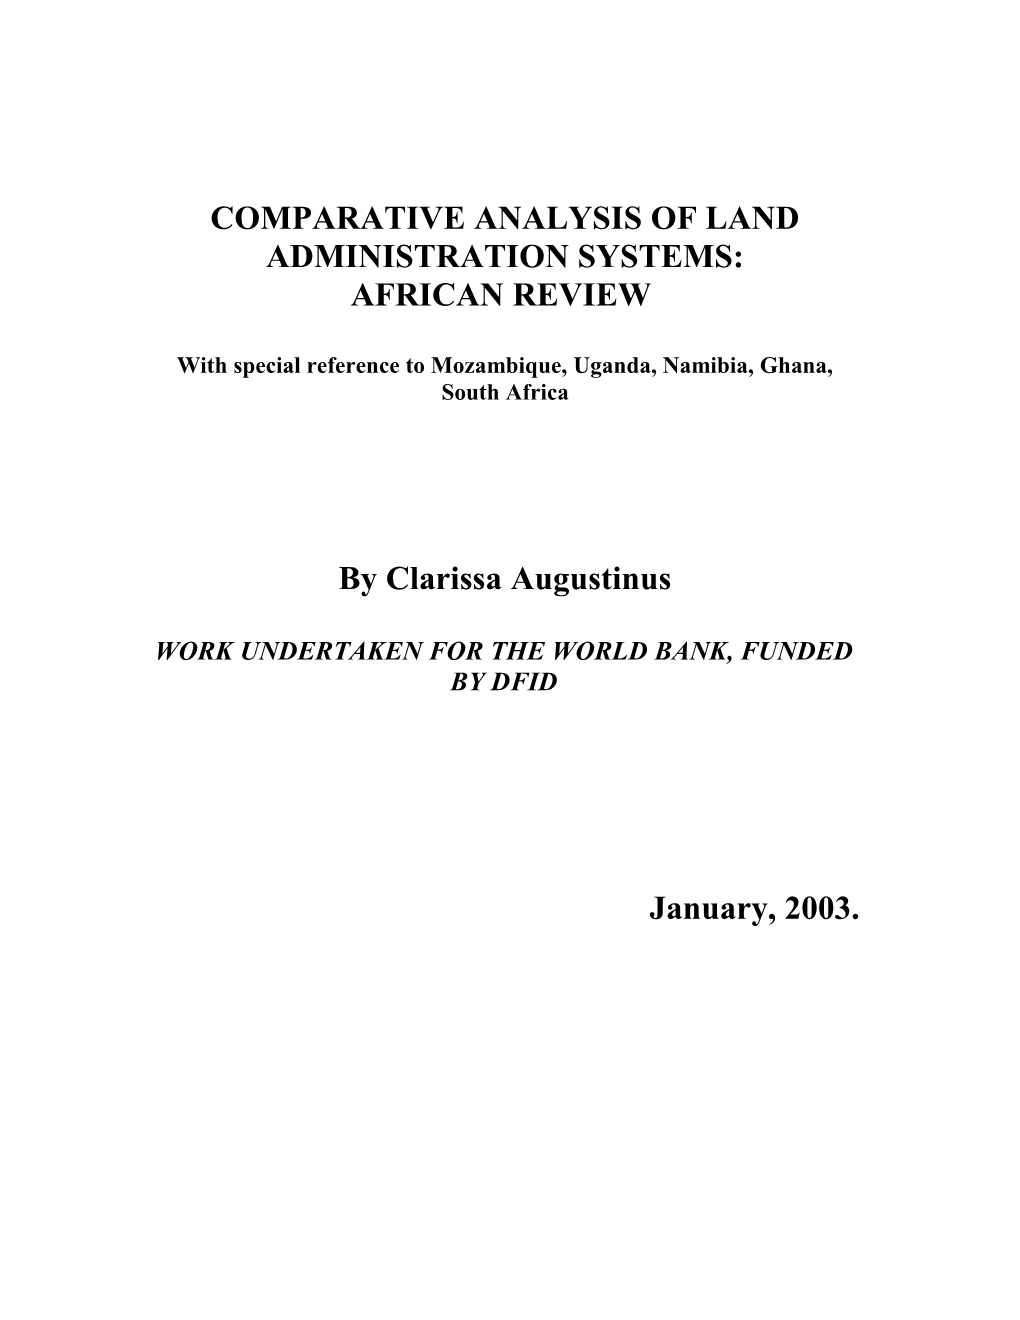 Comparative Analysis of Land Administration Systems